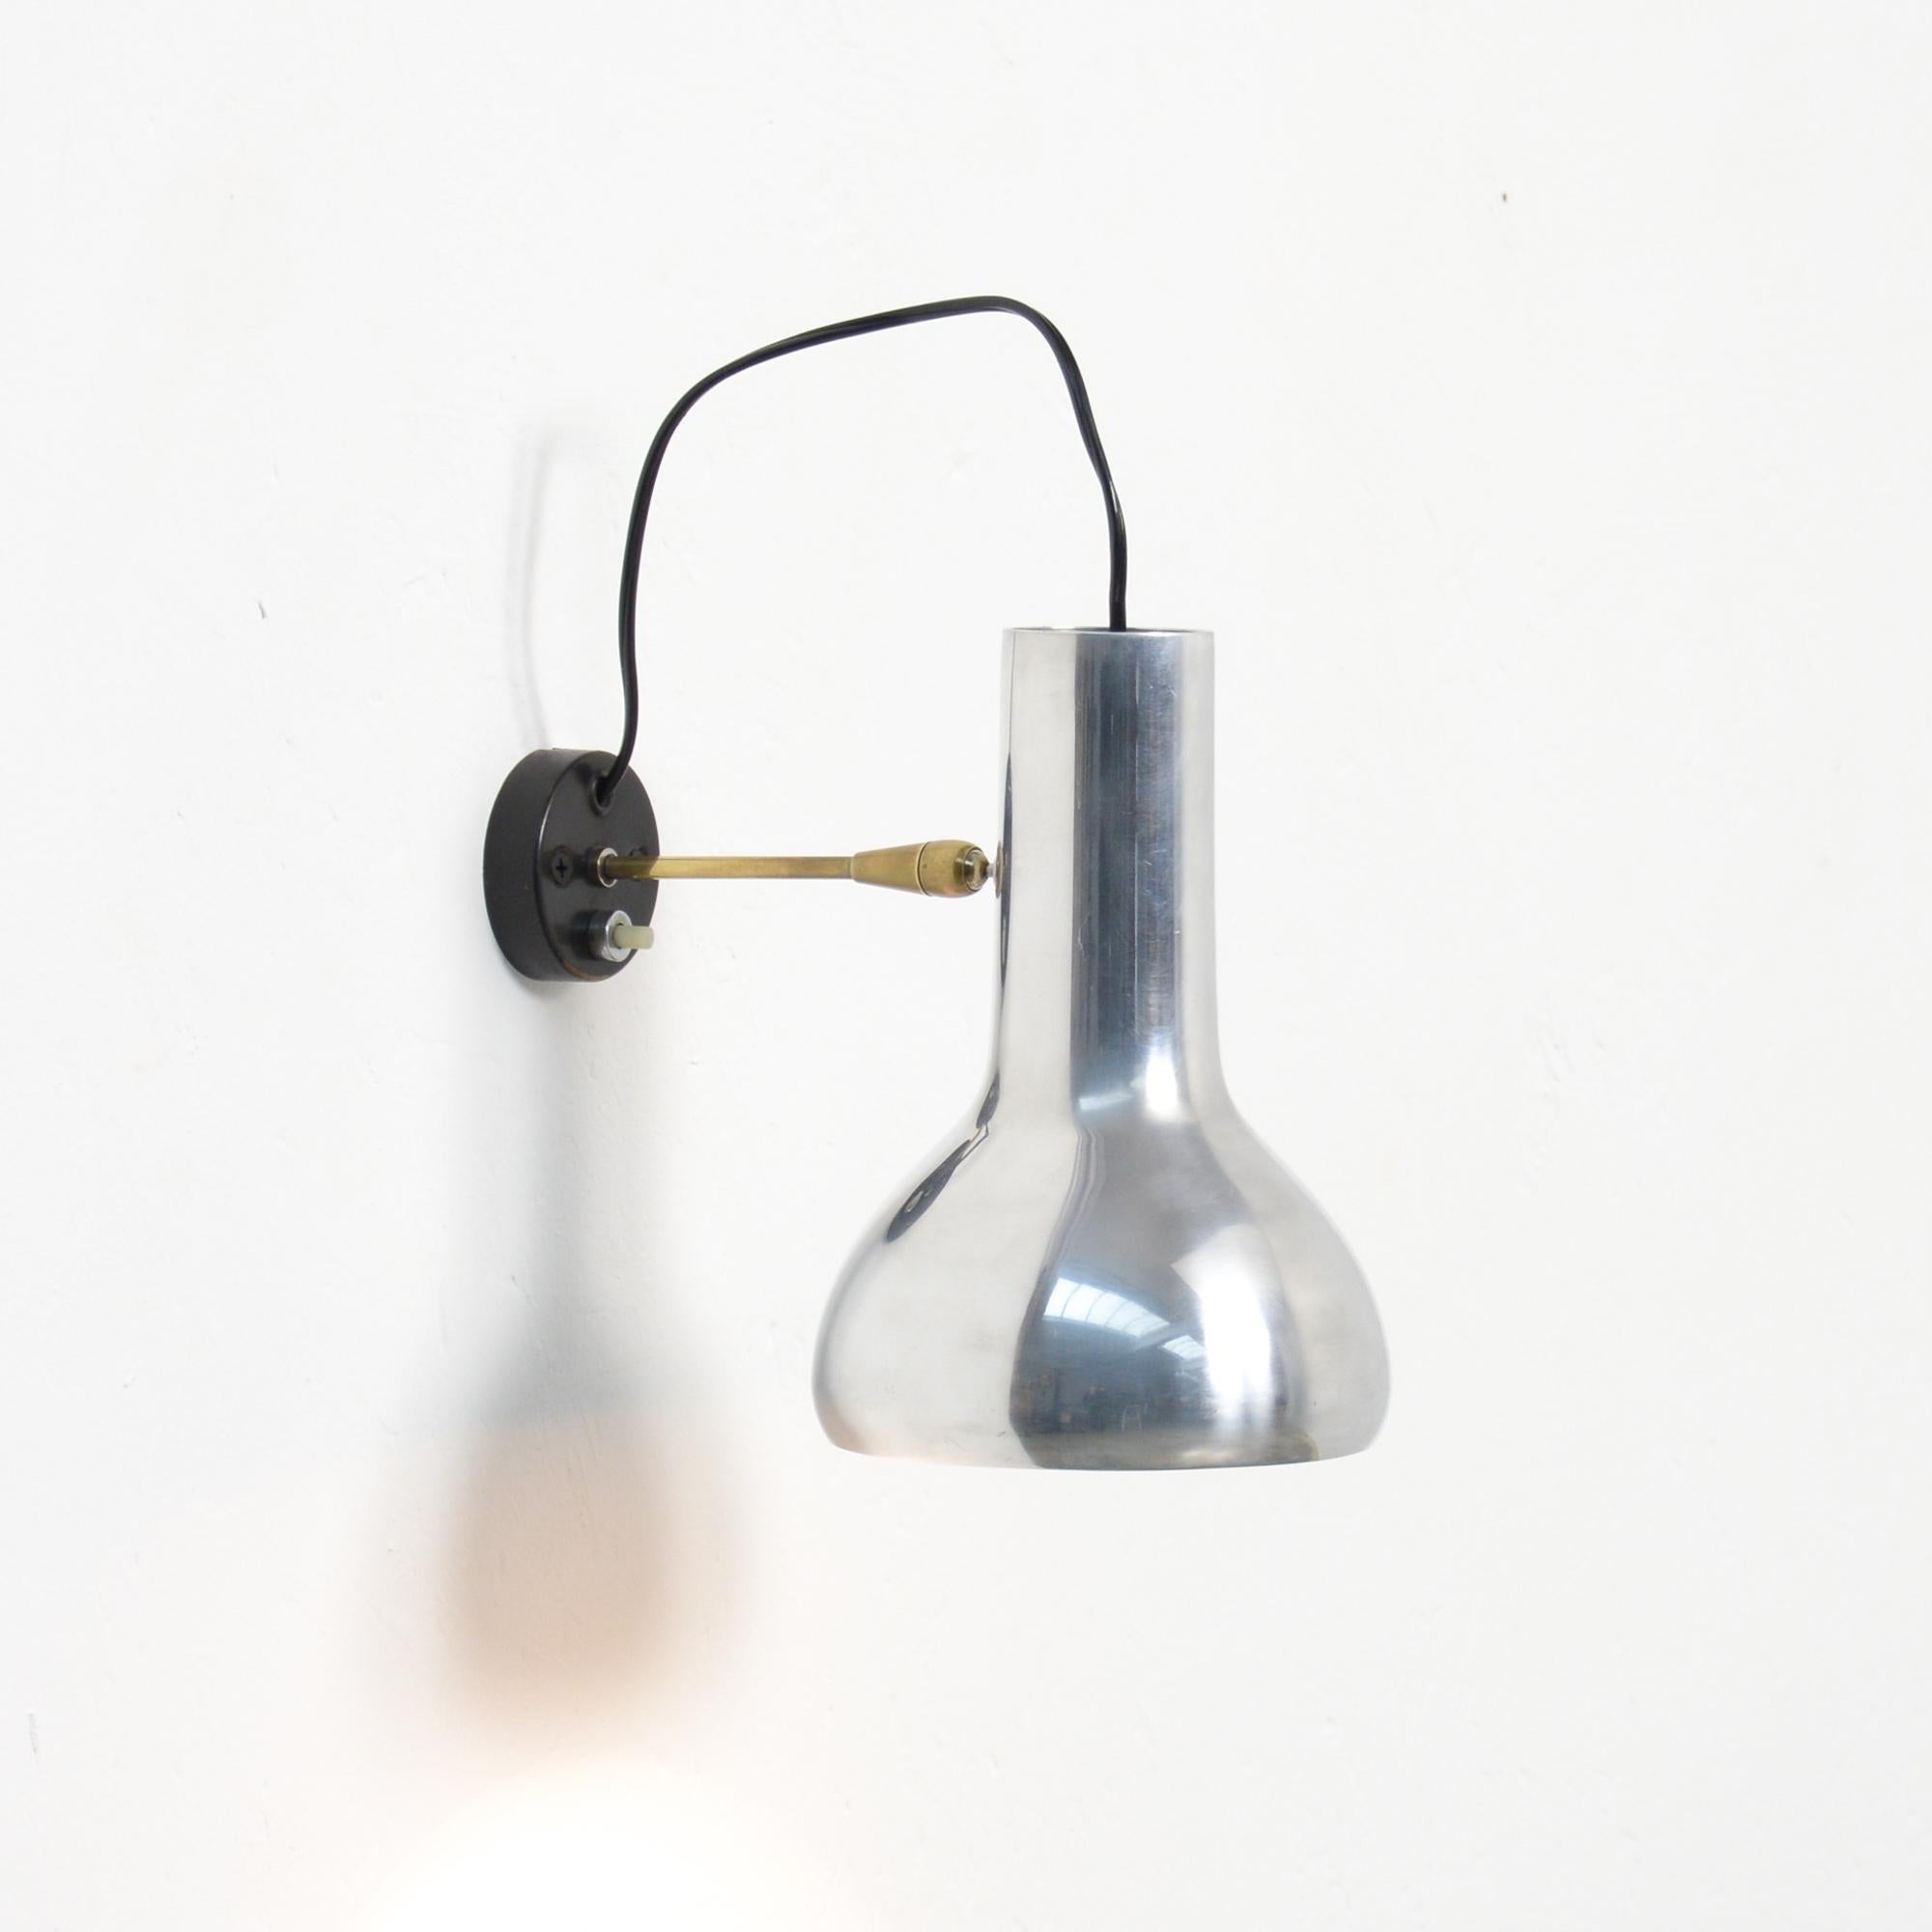 This wall lamp model 7 is an iconic design by Gino Sarfatti. It was manufactured by Arteluce in Italy in 1957.
The base and the stem are made of brass, the base is black lacquered. The hood is made of aluminium and can be turned in many